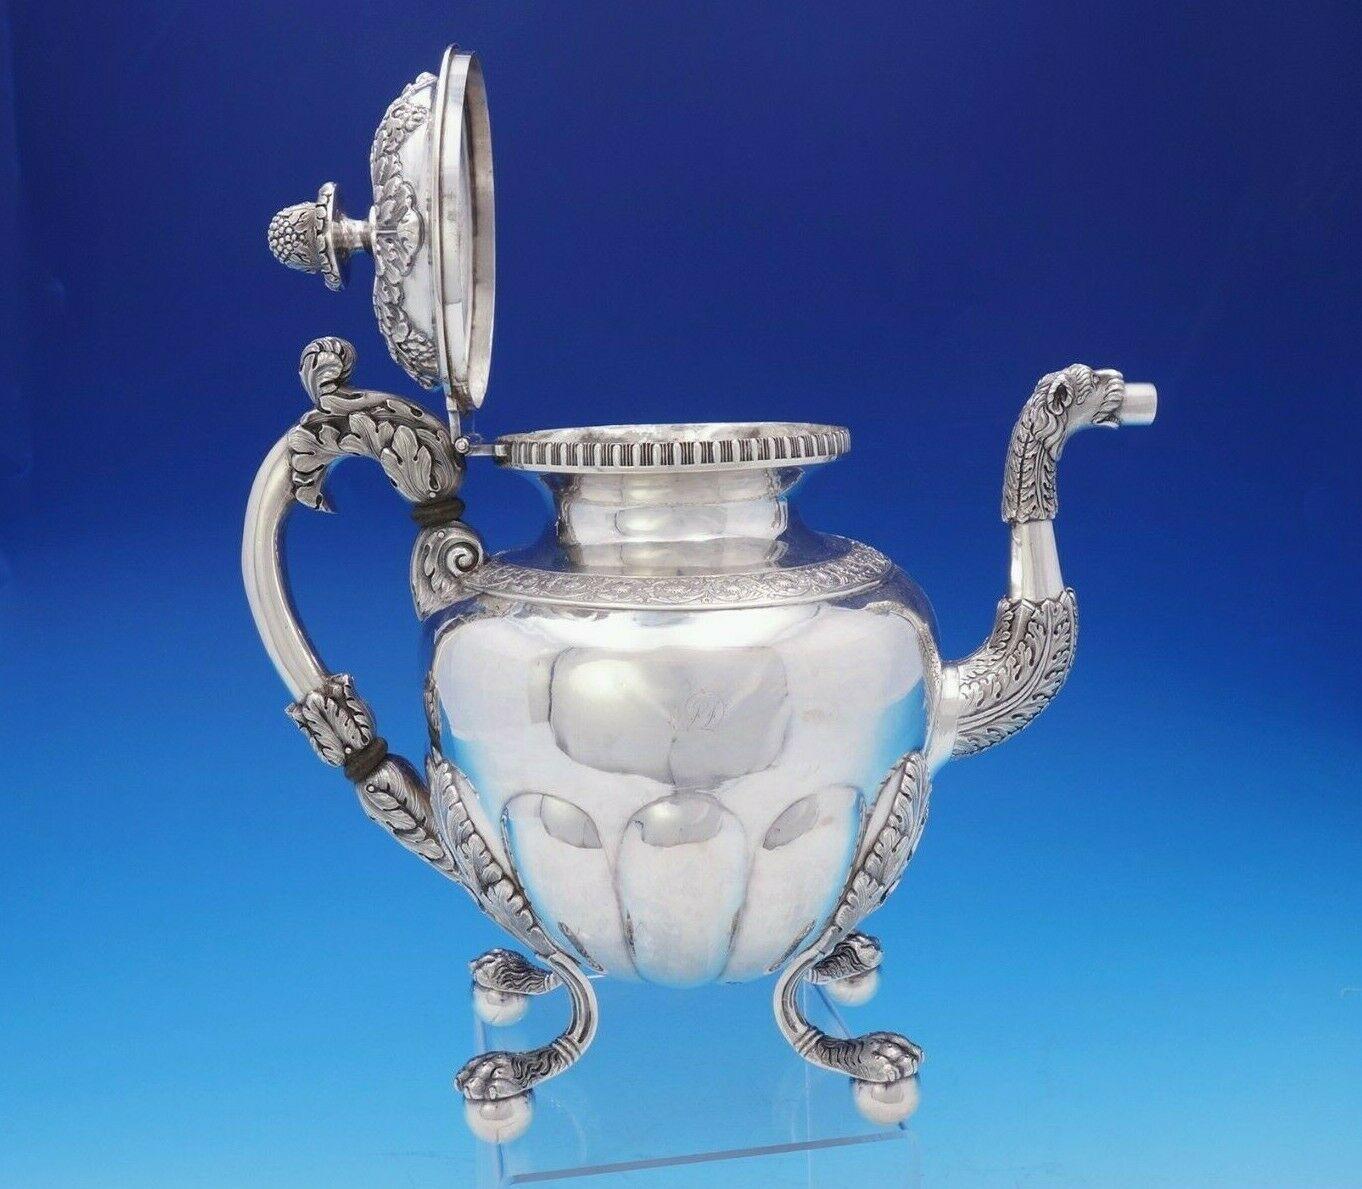 William Thomson

Stunning William Thomson coin silver 4-piece tea set with elaborate floral and acanthus leaf design. It was made in New York circa 1809-1845, and features applied lion's paw on ball feet and berry/grape finial. This set includes:

1